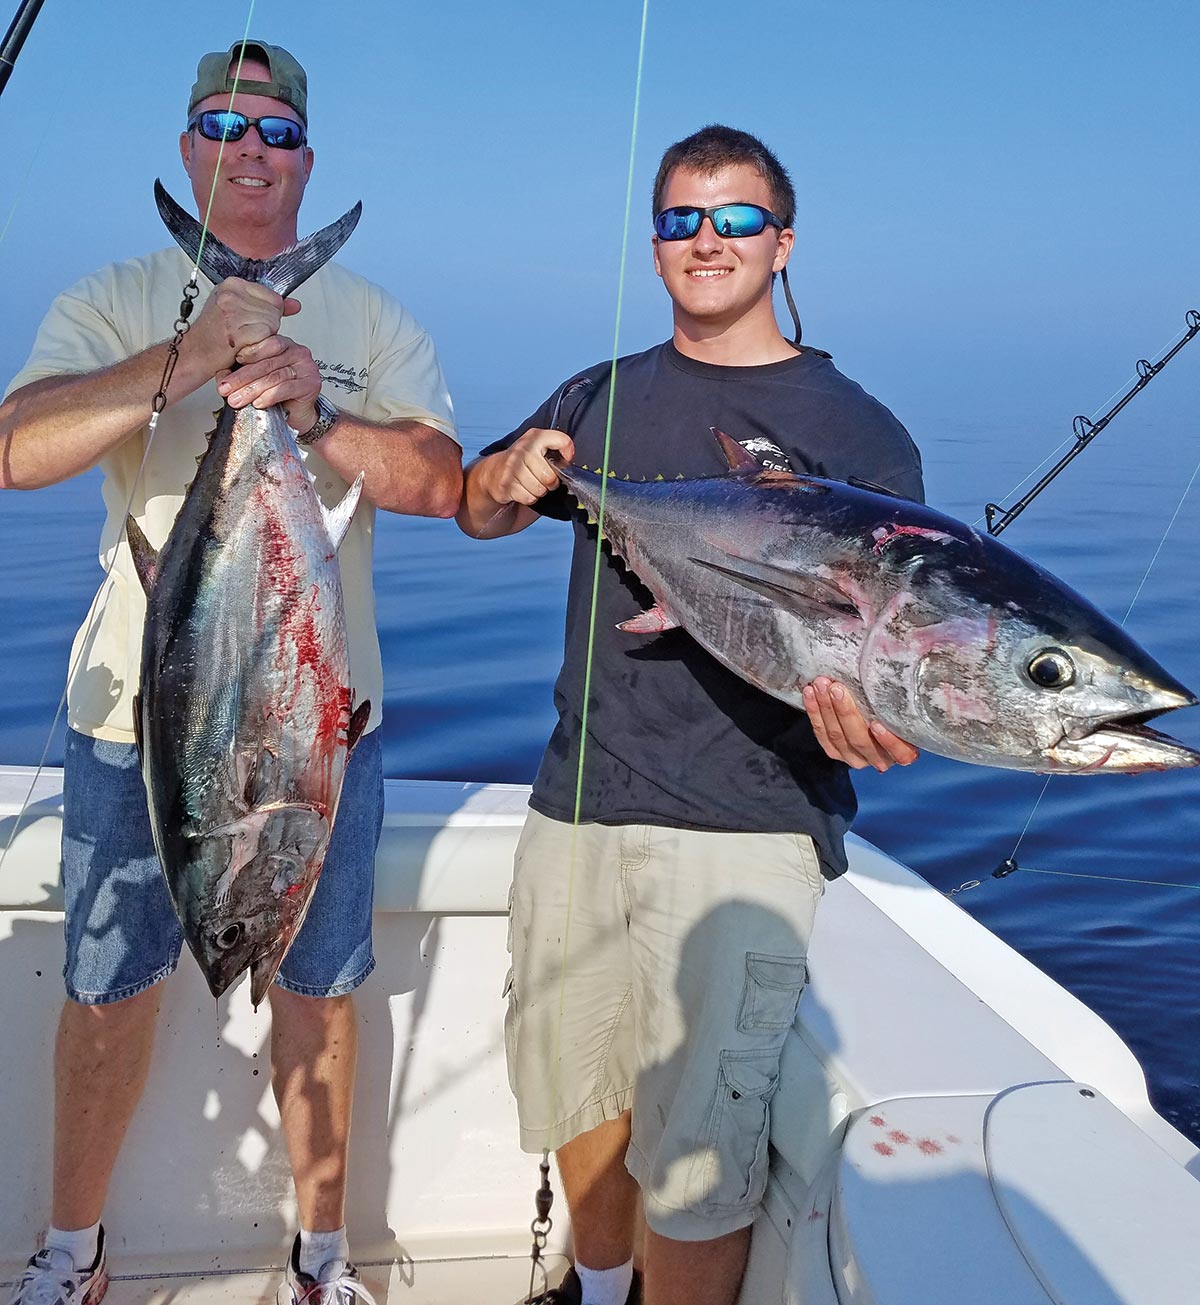 https://www.thefisherman.com/wp-content/uploads/2019/07/2019-7-offshore-rigging-perfection-SUCCESS.jpg